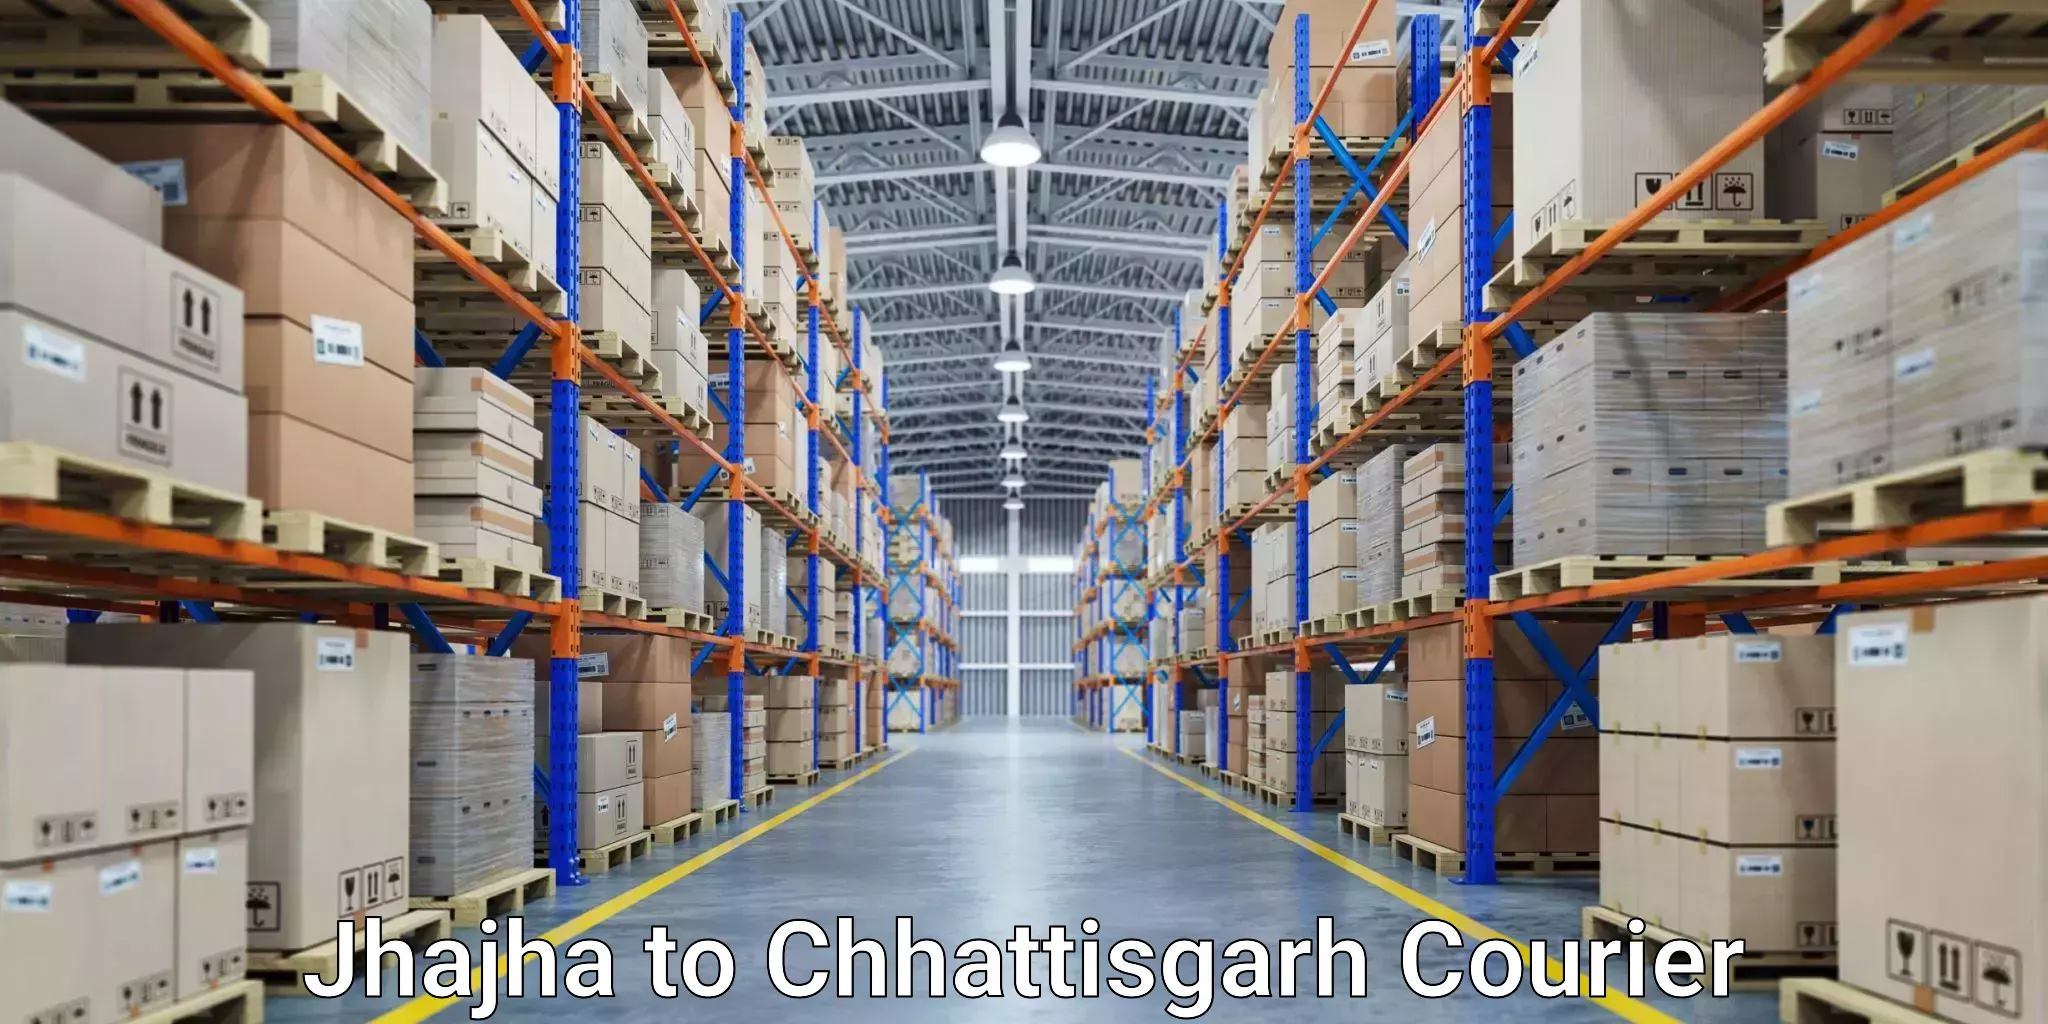 Courier service efficiency Jhajha to Ratanpur